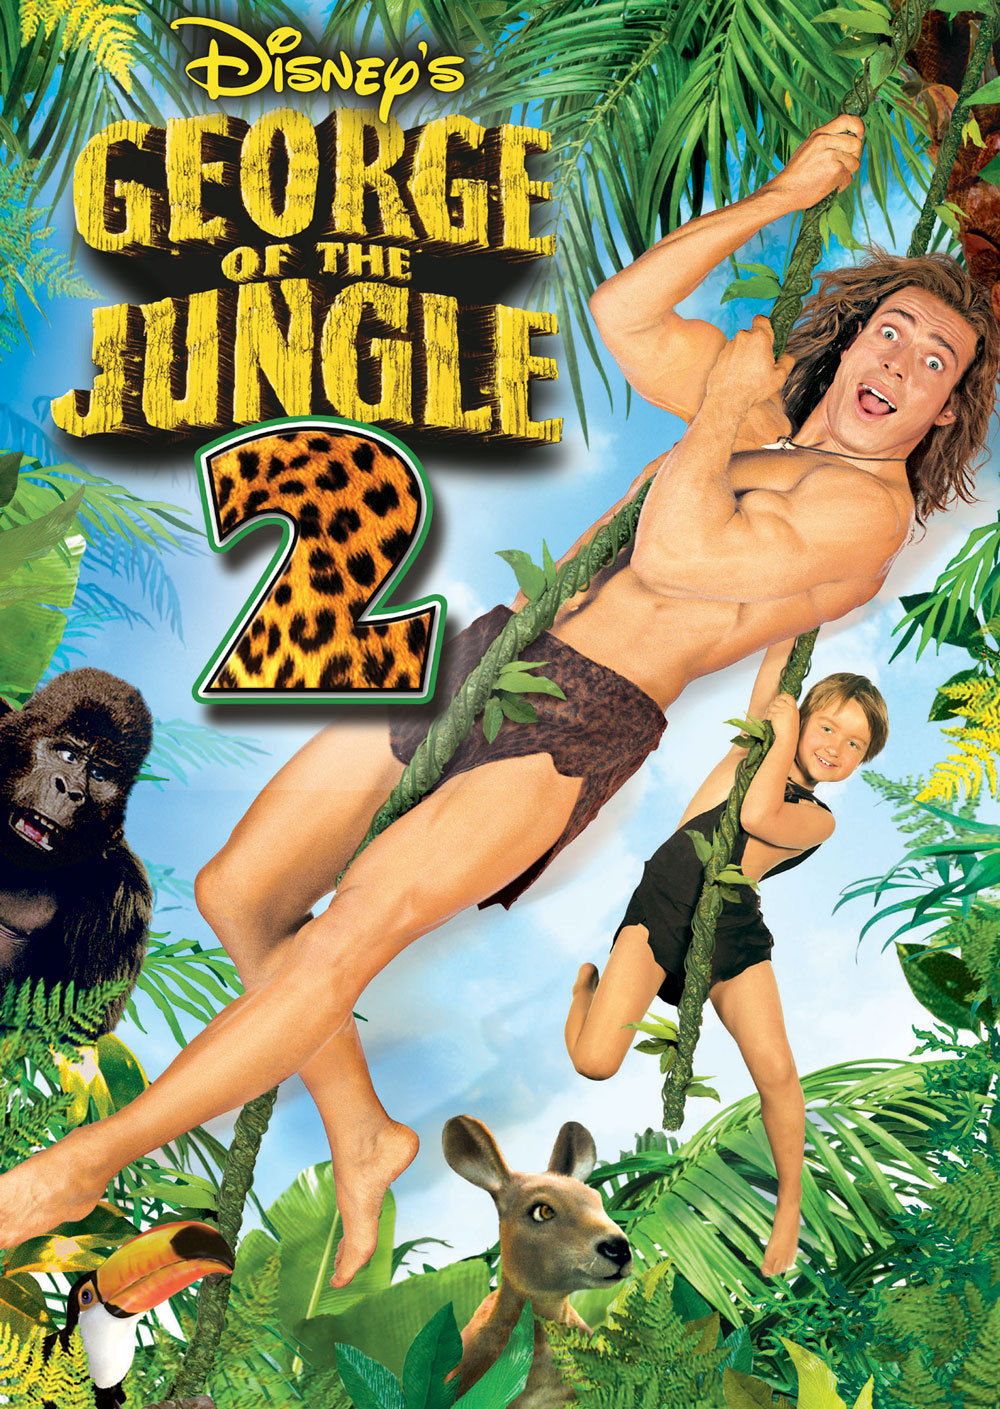 George Of The Jungle Backgrounds, Compatible - PC, Mobile, Gadgets| 1000x1409 px